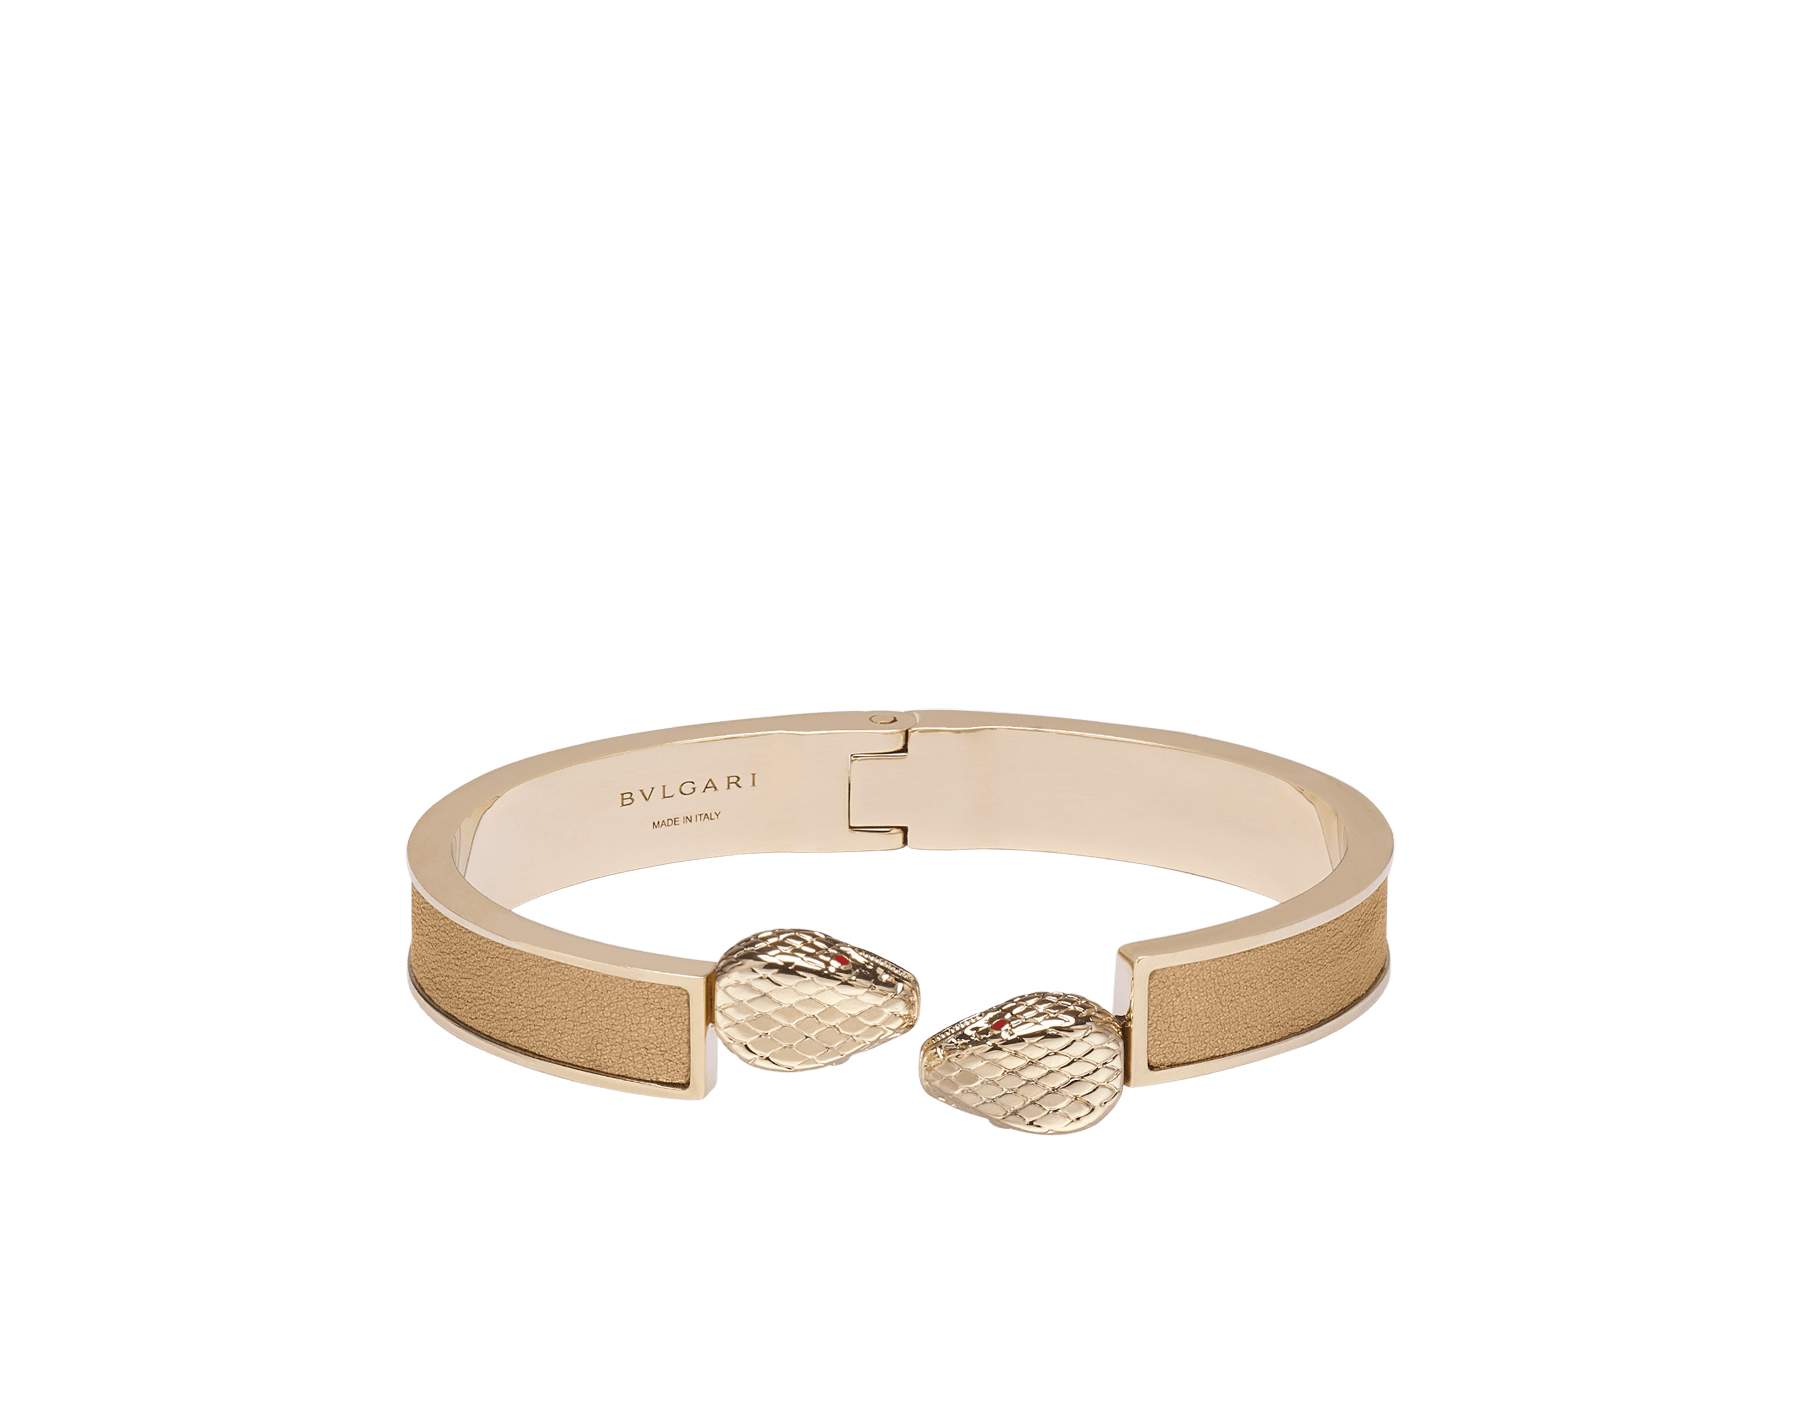 Serpenti Forever bangle bracelet in light gold-plated brass with antique gold Liquid Metal calf leather inserts. Captivating double snakehead hinge closure in light gold-plated brass embellished with red enamel eyes. SERPHINGE-LMCL-AG image 1